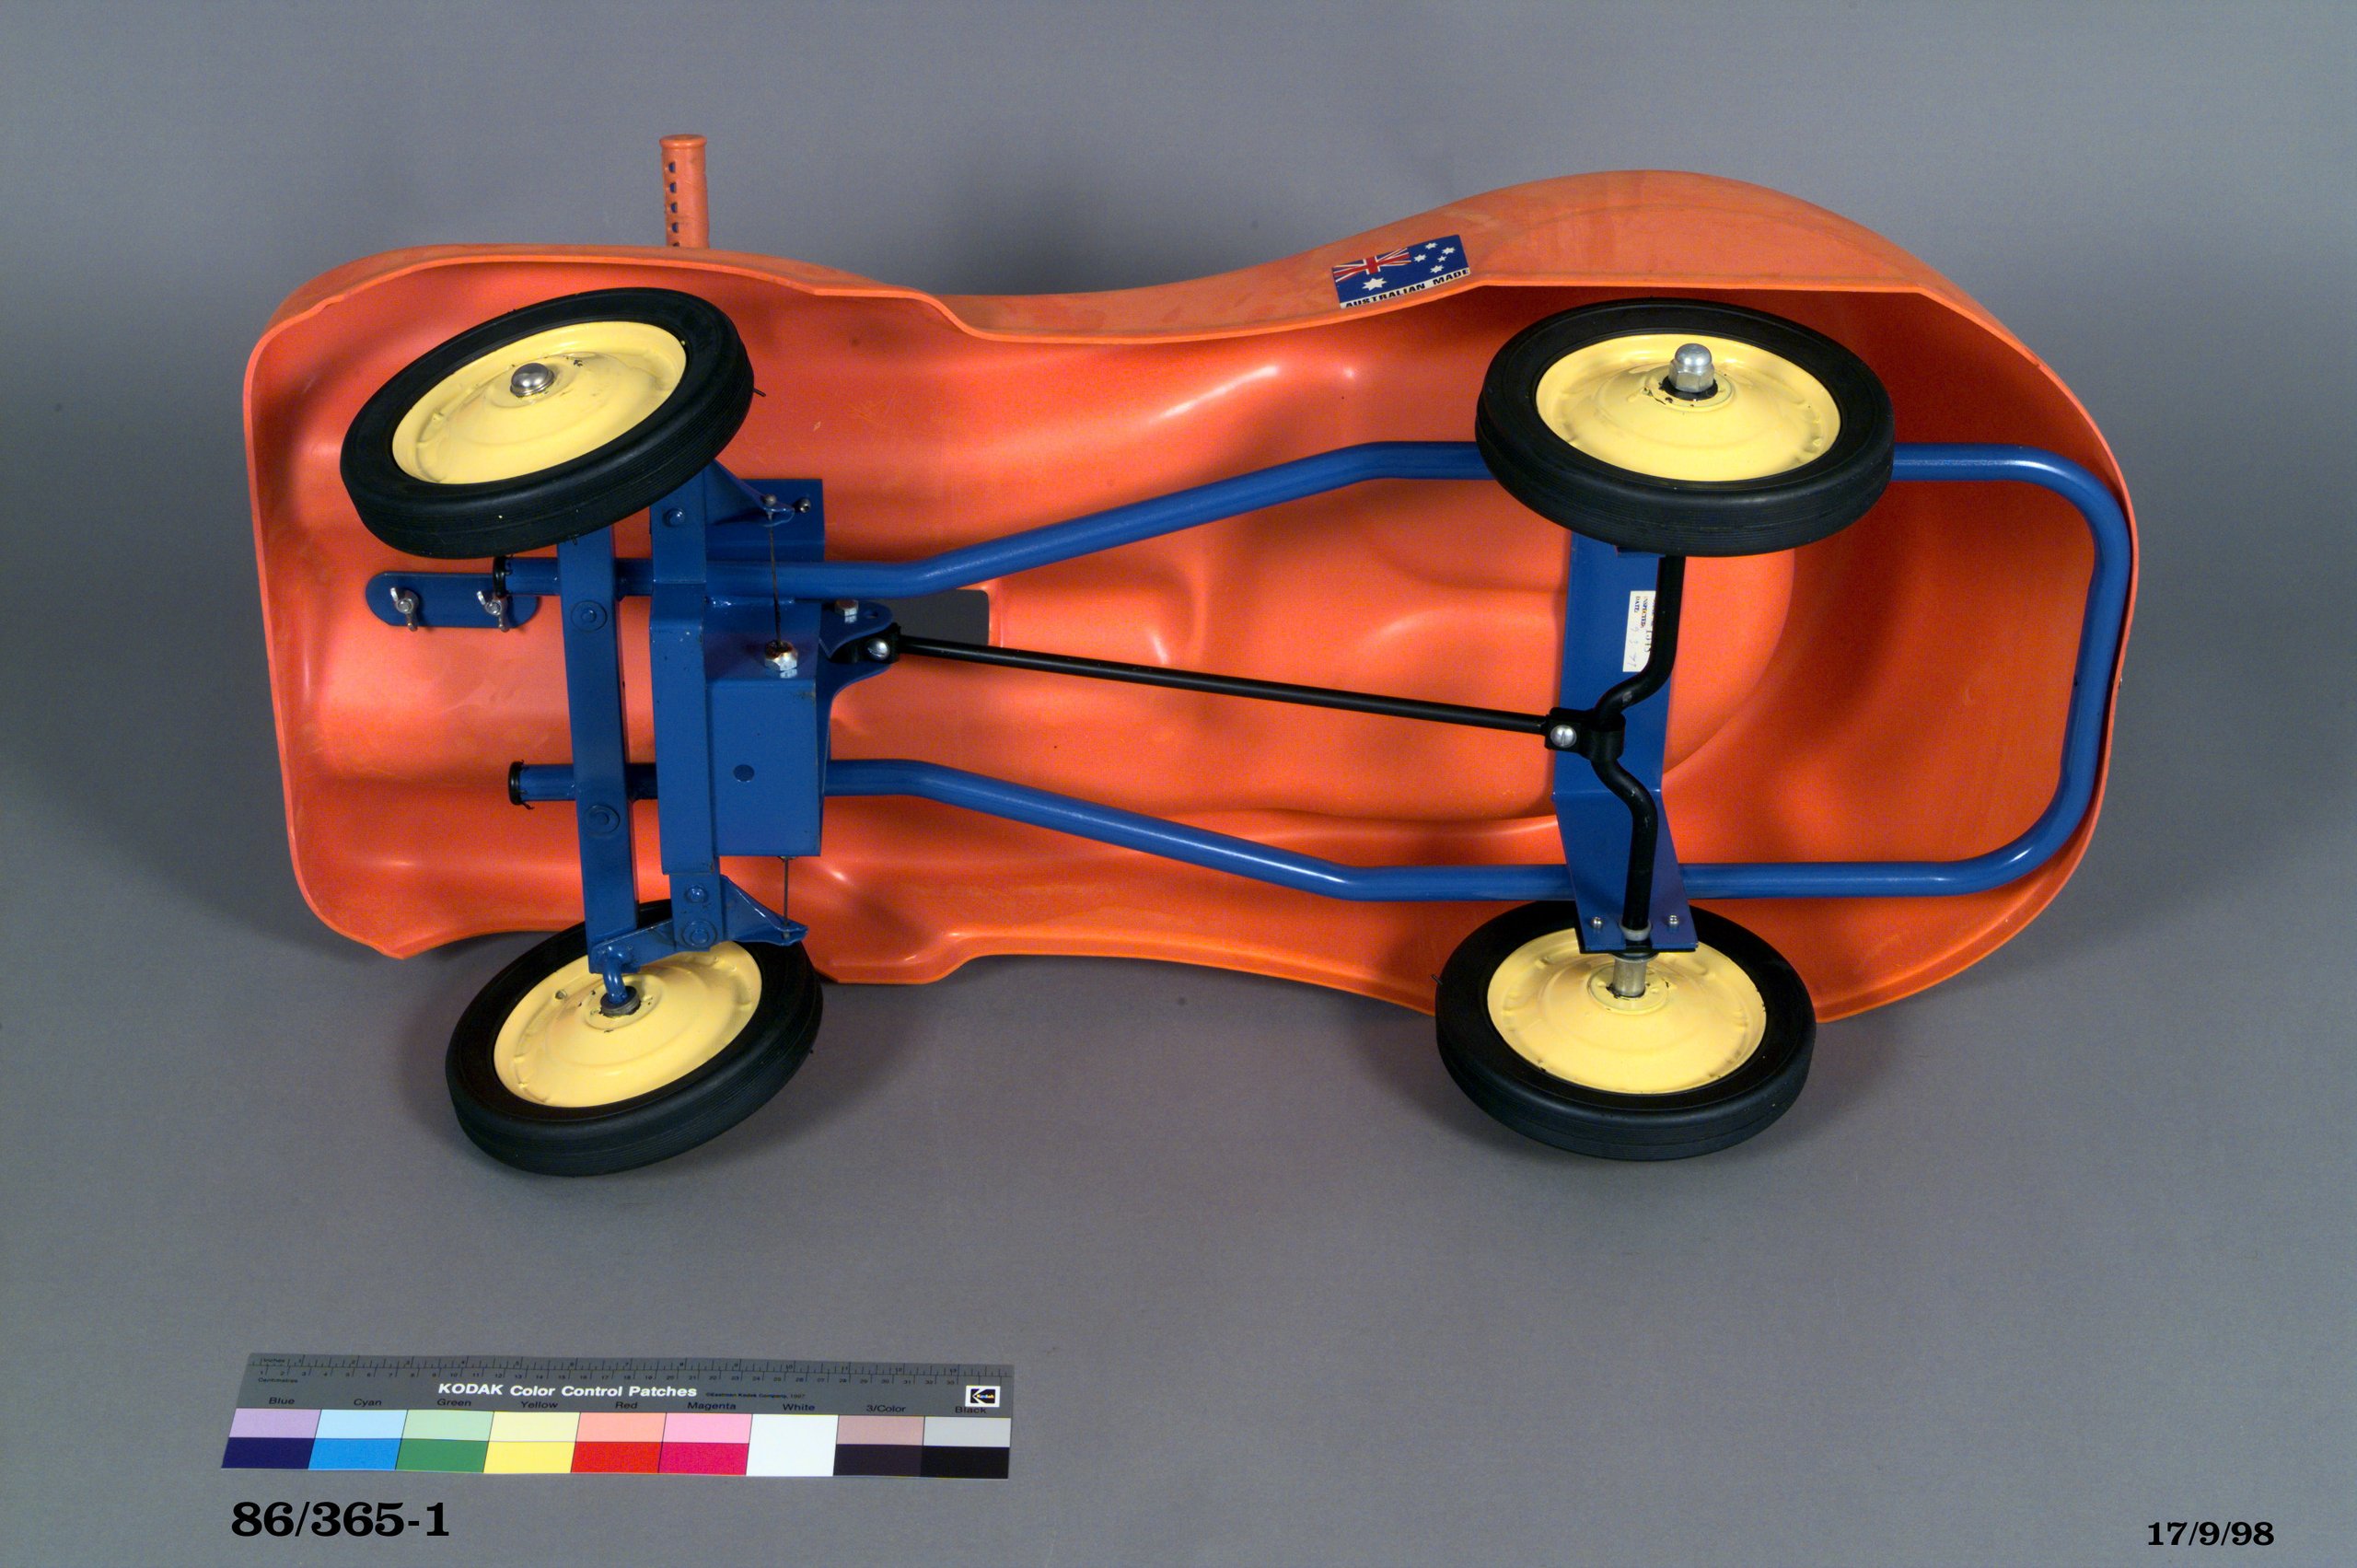 Cyclops 'Rowcar' disabled child's ride-on toy